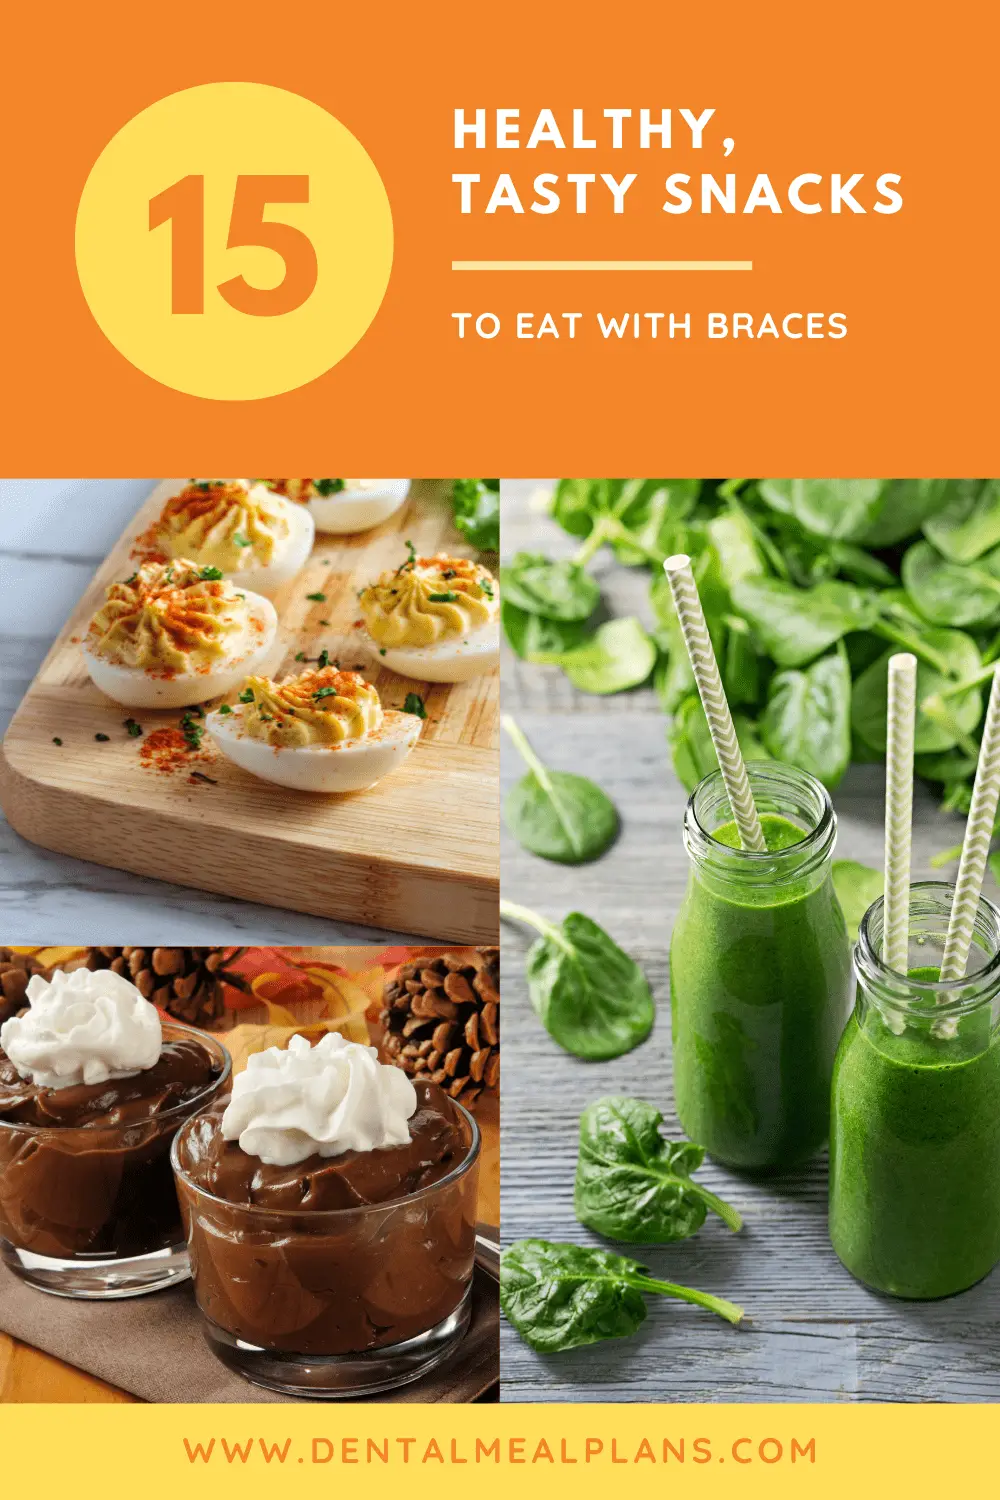 15 healthy tasty snacks to eat with braces image of pudding, deviled eggs, and green smoothie with website title www.dentalmealplans.com